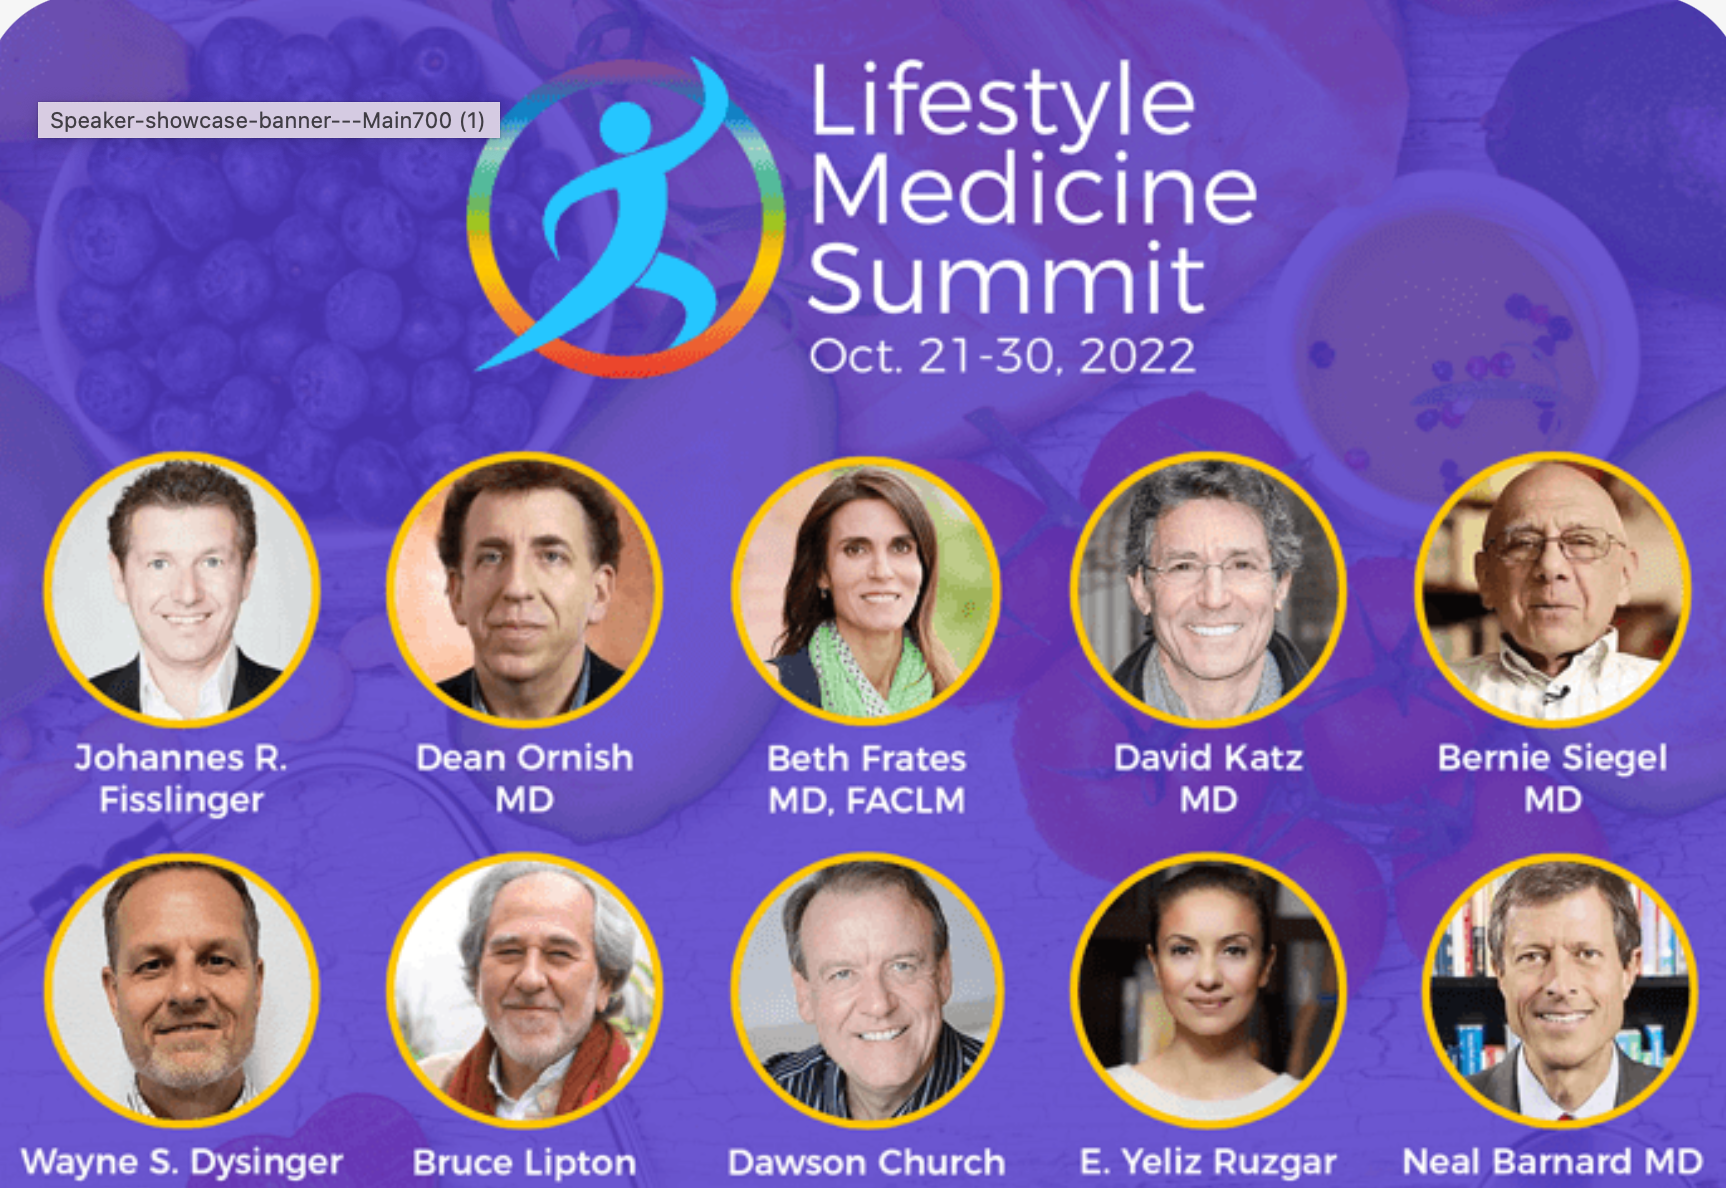 Dr. Frates was honored and delighted to be included in the Lifestyle Medicine Summit with year as she was alongside many pioneers including Dr. Dean Ornish, Dr. David Katz, and Dr. Wayne Dysinger.